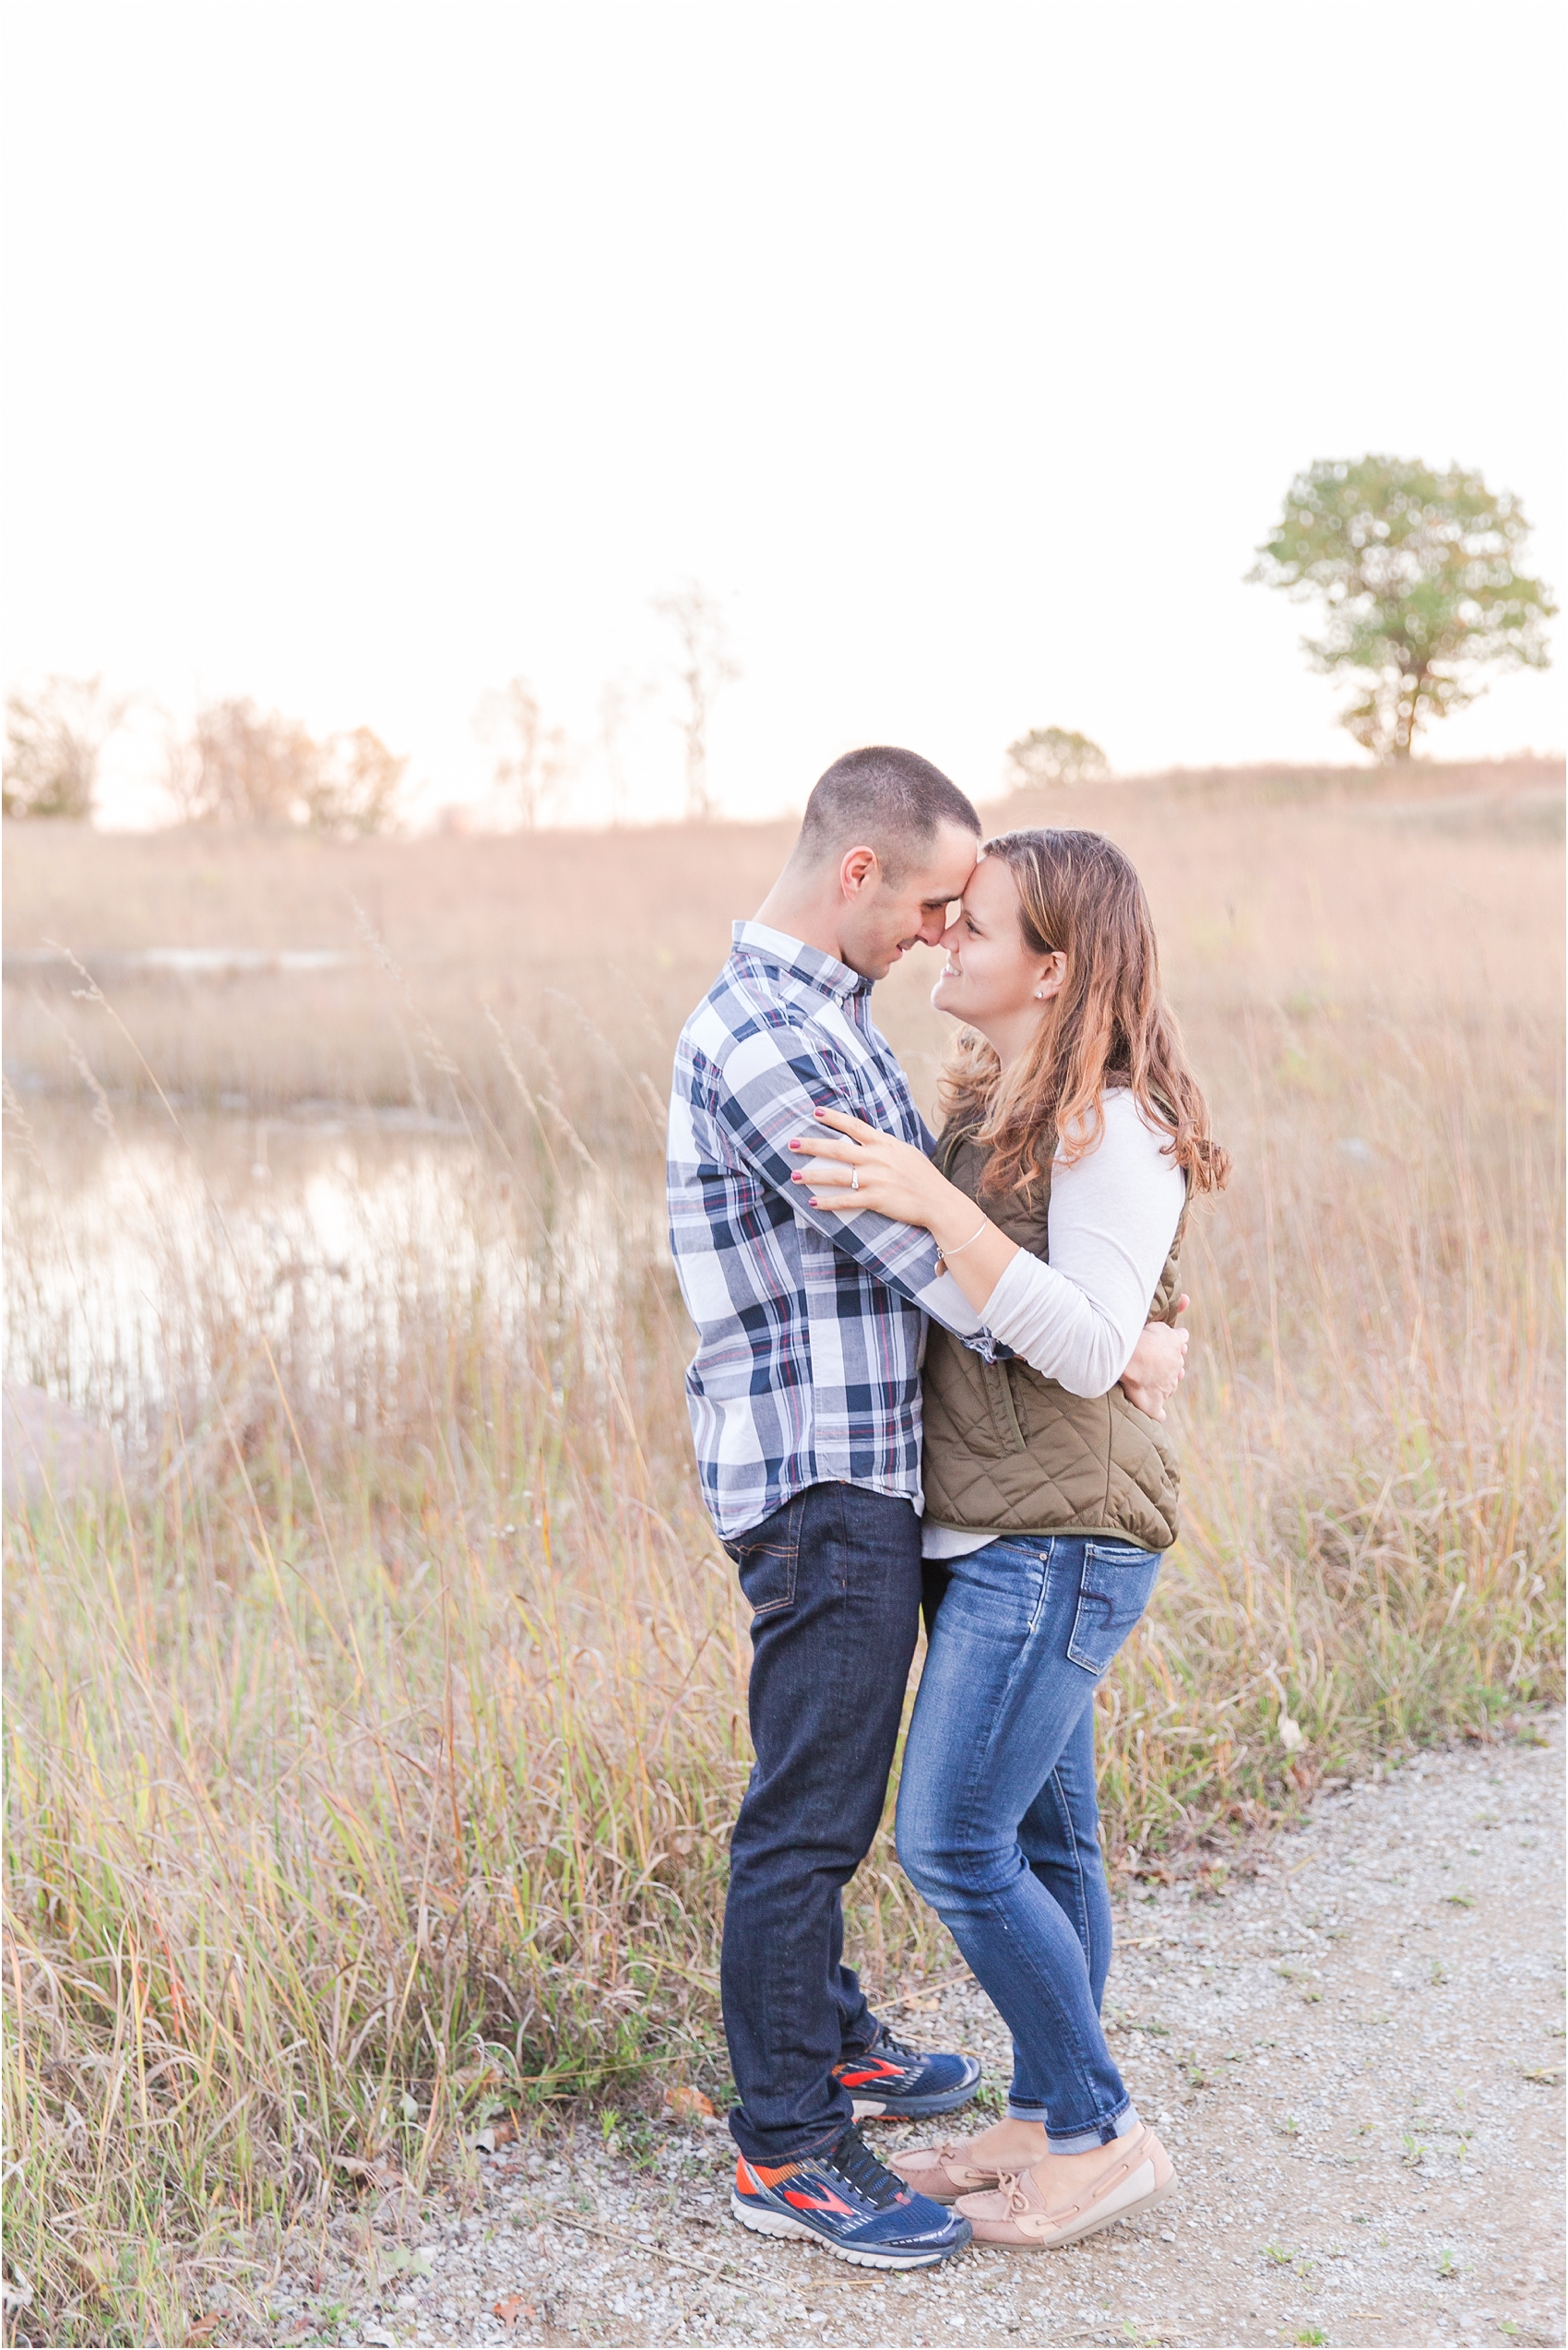 romantic-fall-engagement-photos-at-indian-springs-metropark-in-clarkston-mi-by-courtney-carolyn-photography_0017.jpg